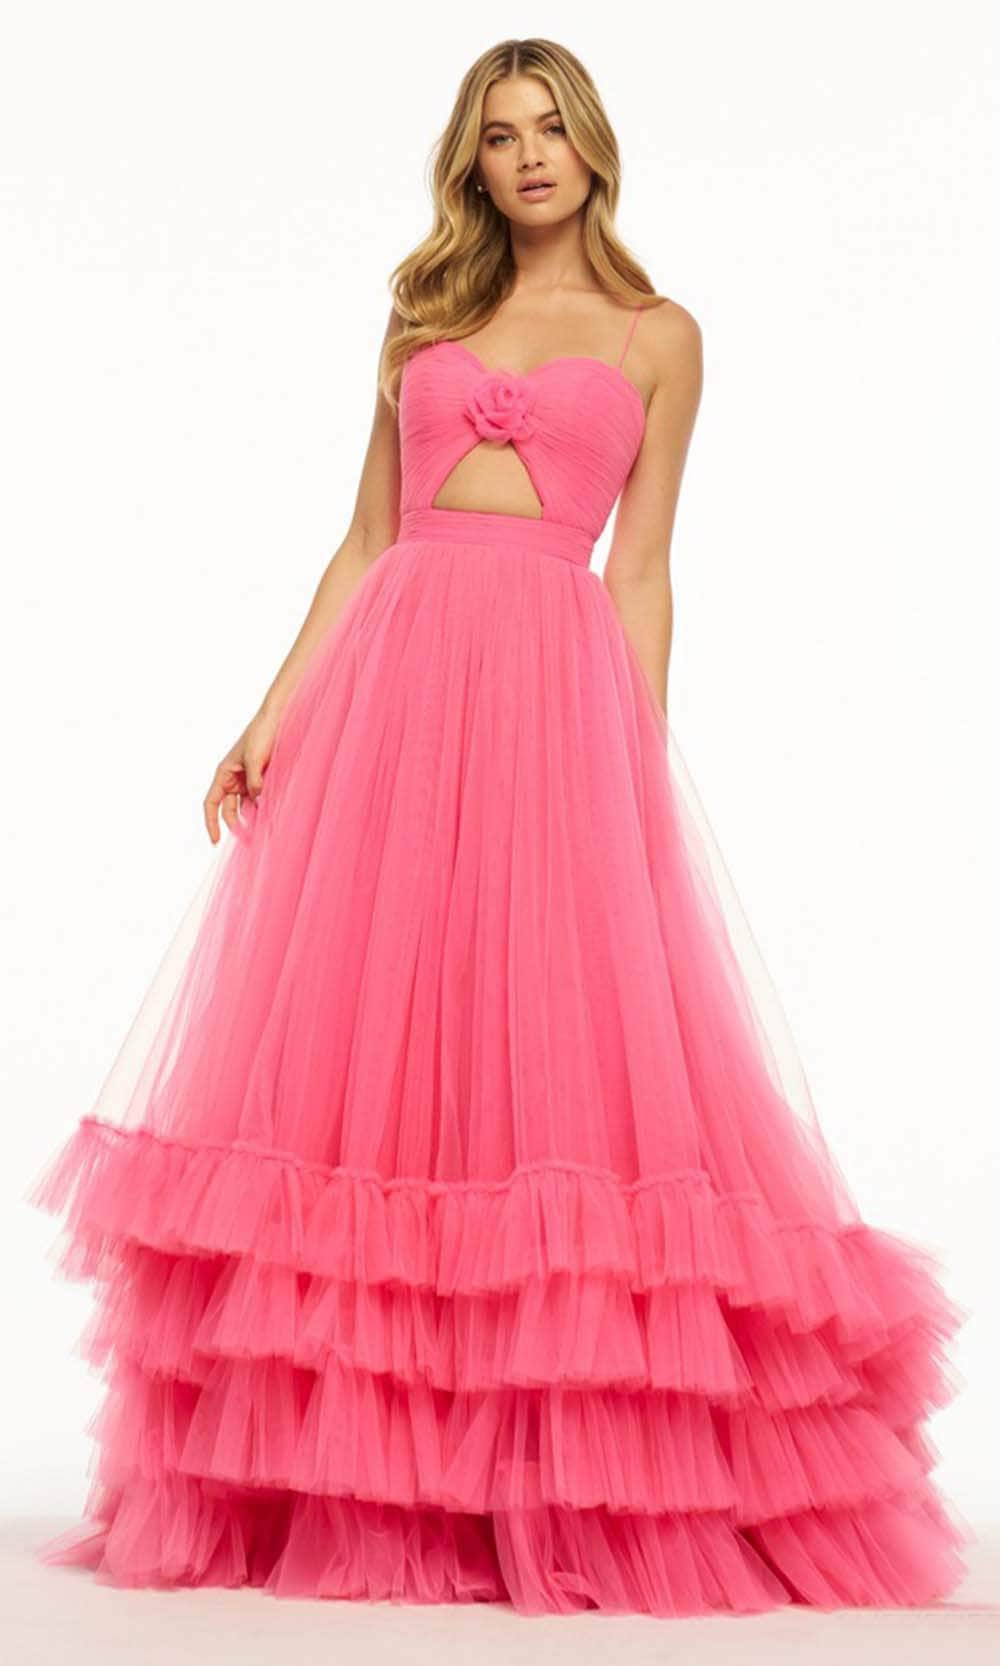 Image of Sherri Hill 55982 - Ruched Floral Accent Prom Dress